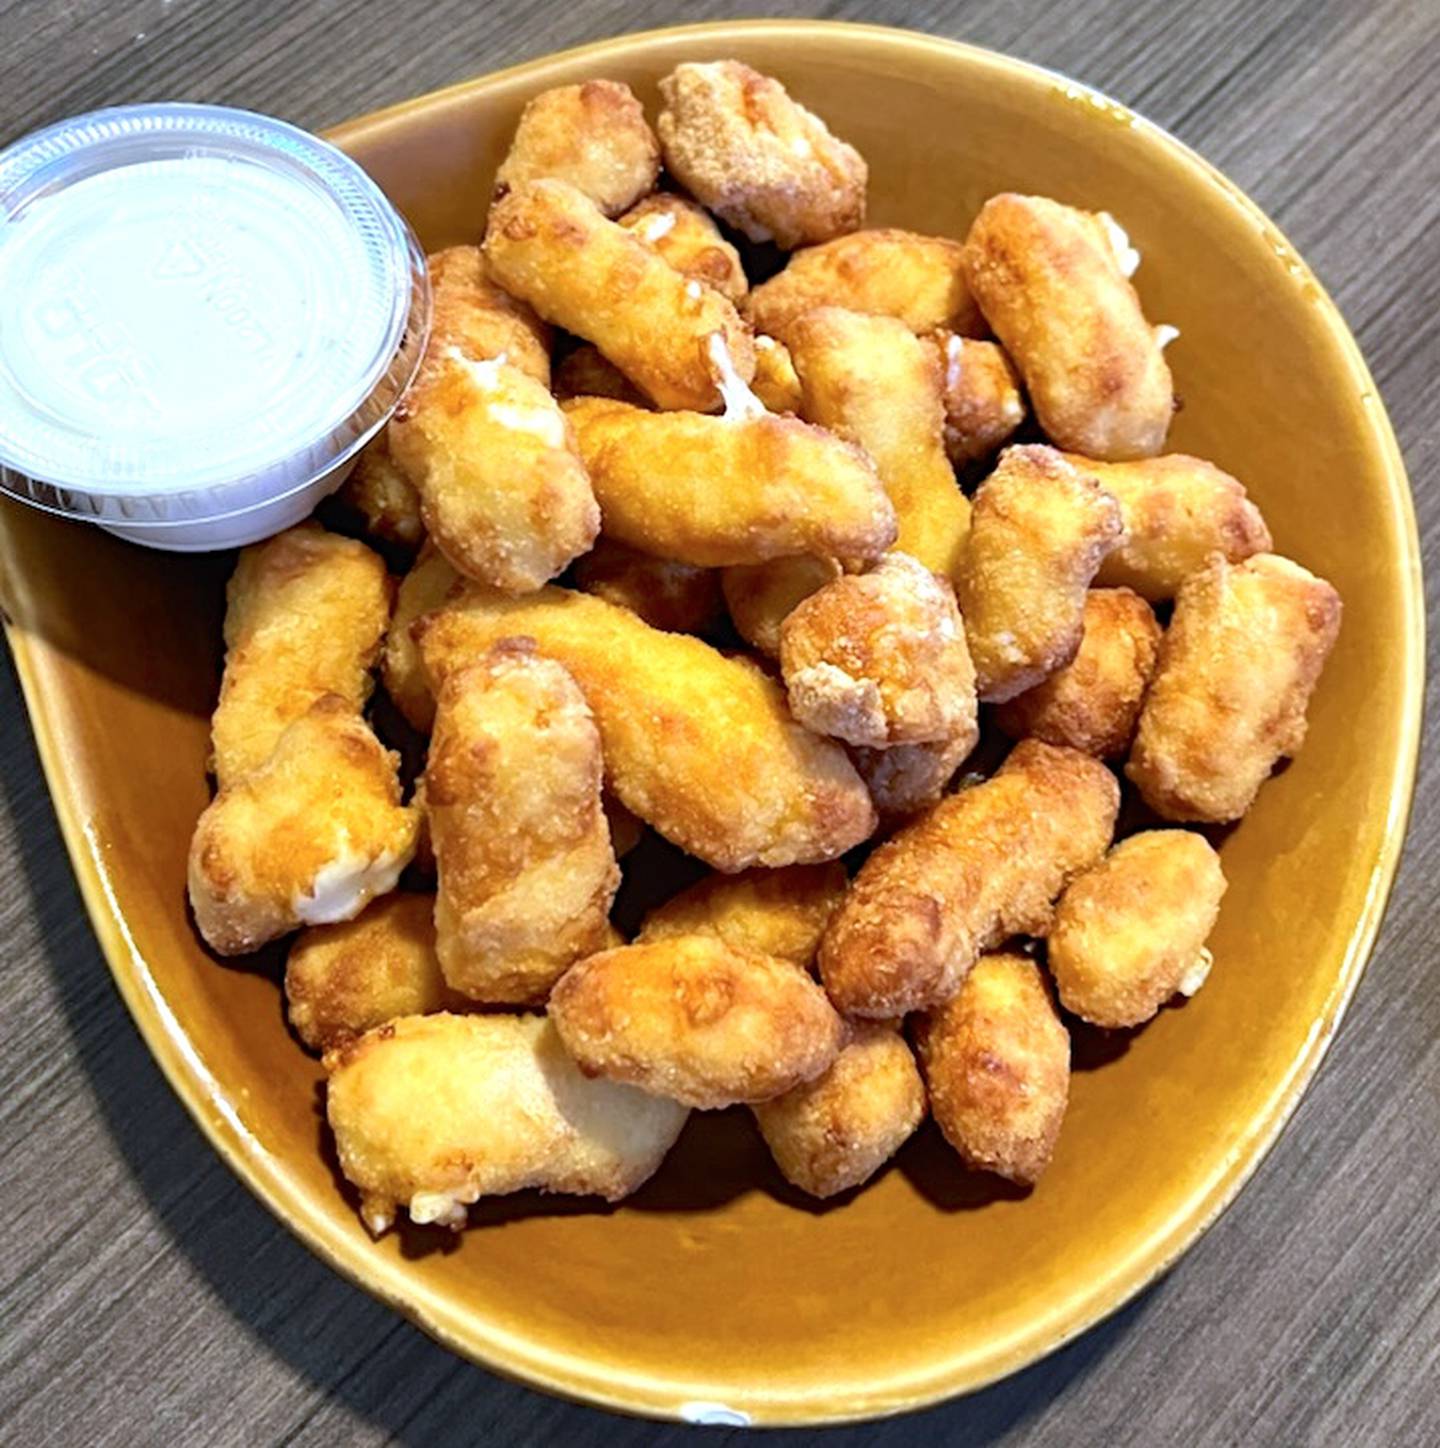 Fried cheese curds are one of several appetizers at the Coffee Cup.